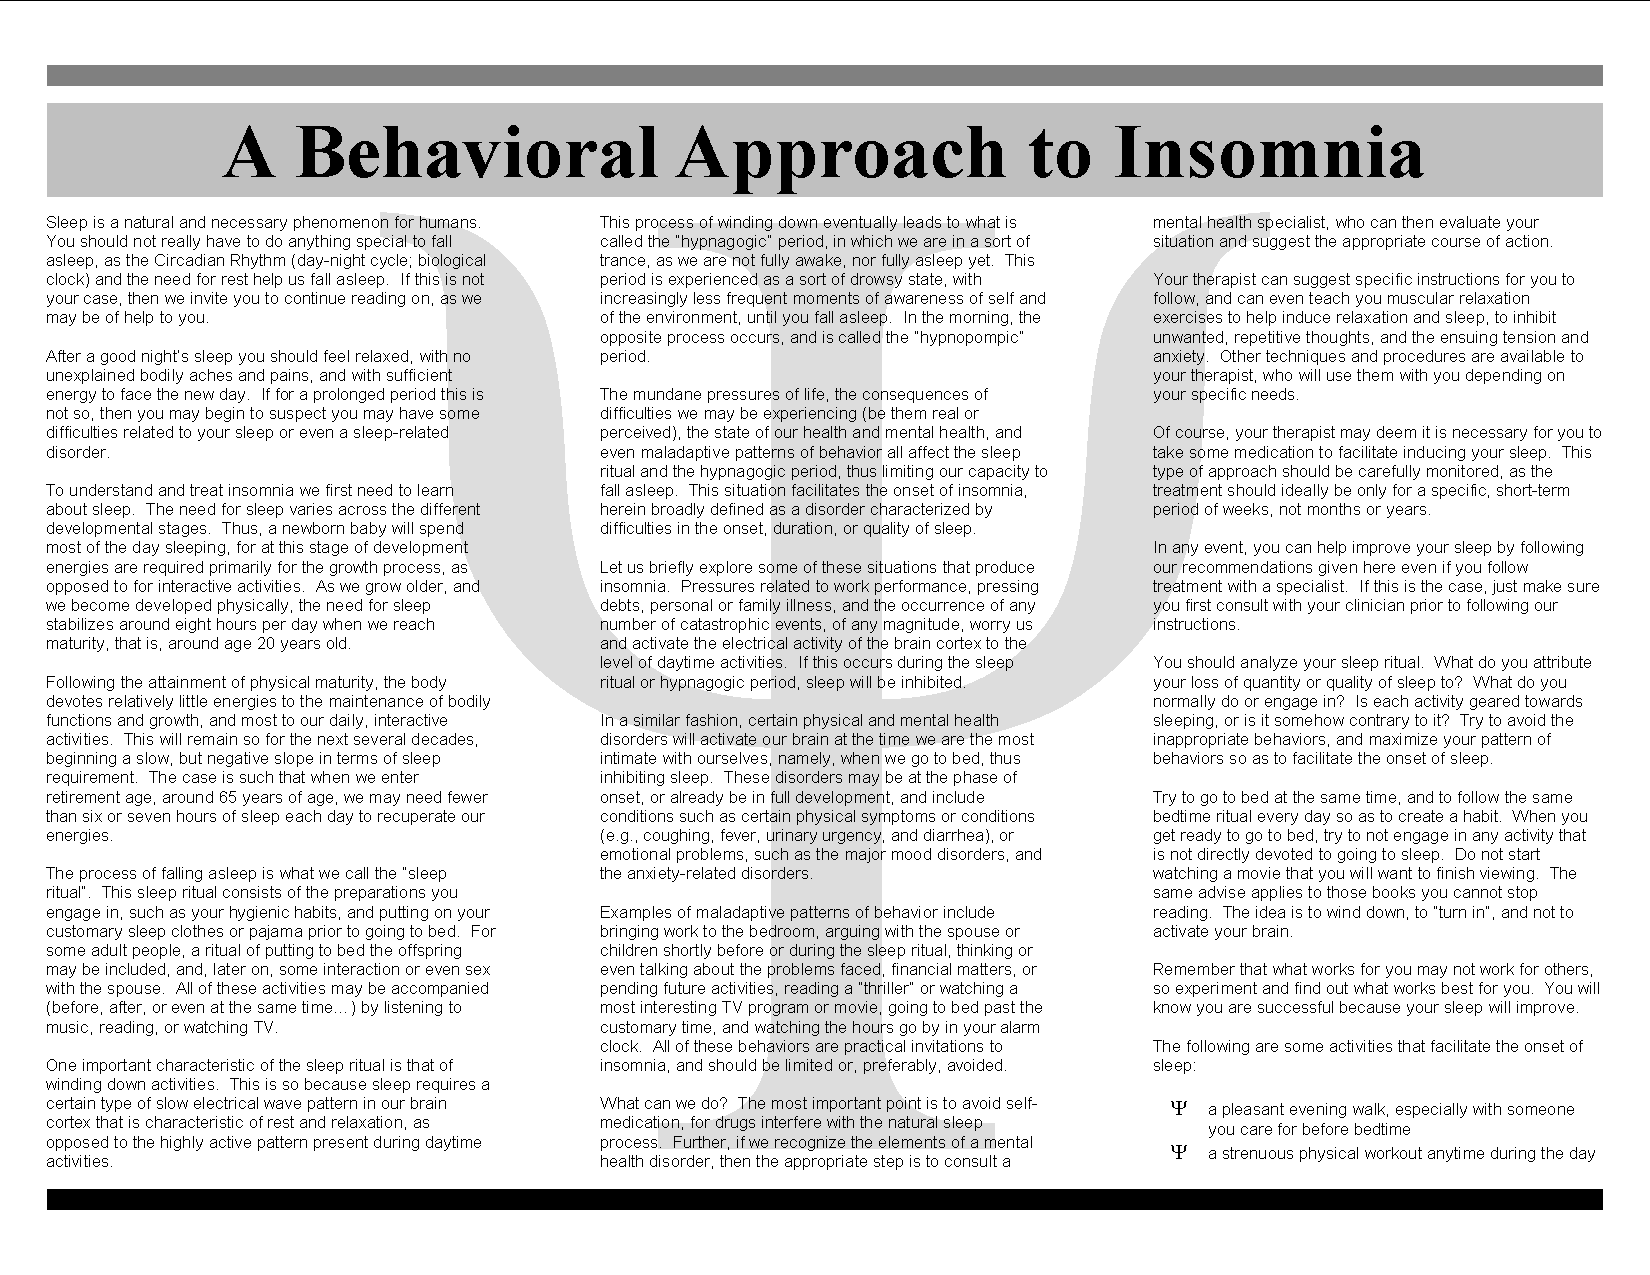 A Behavioral Approach to Insomnia, P. 2